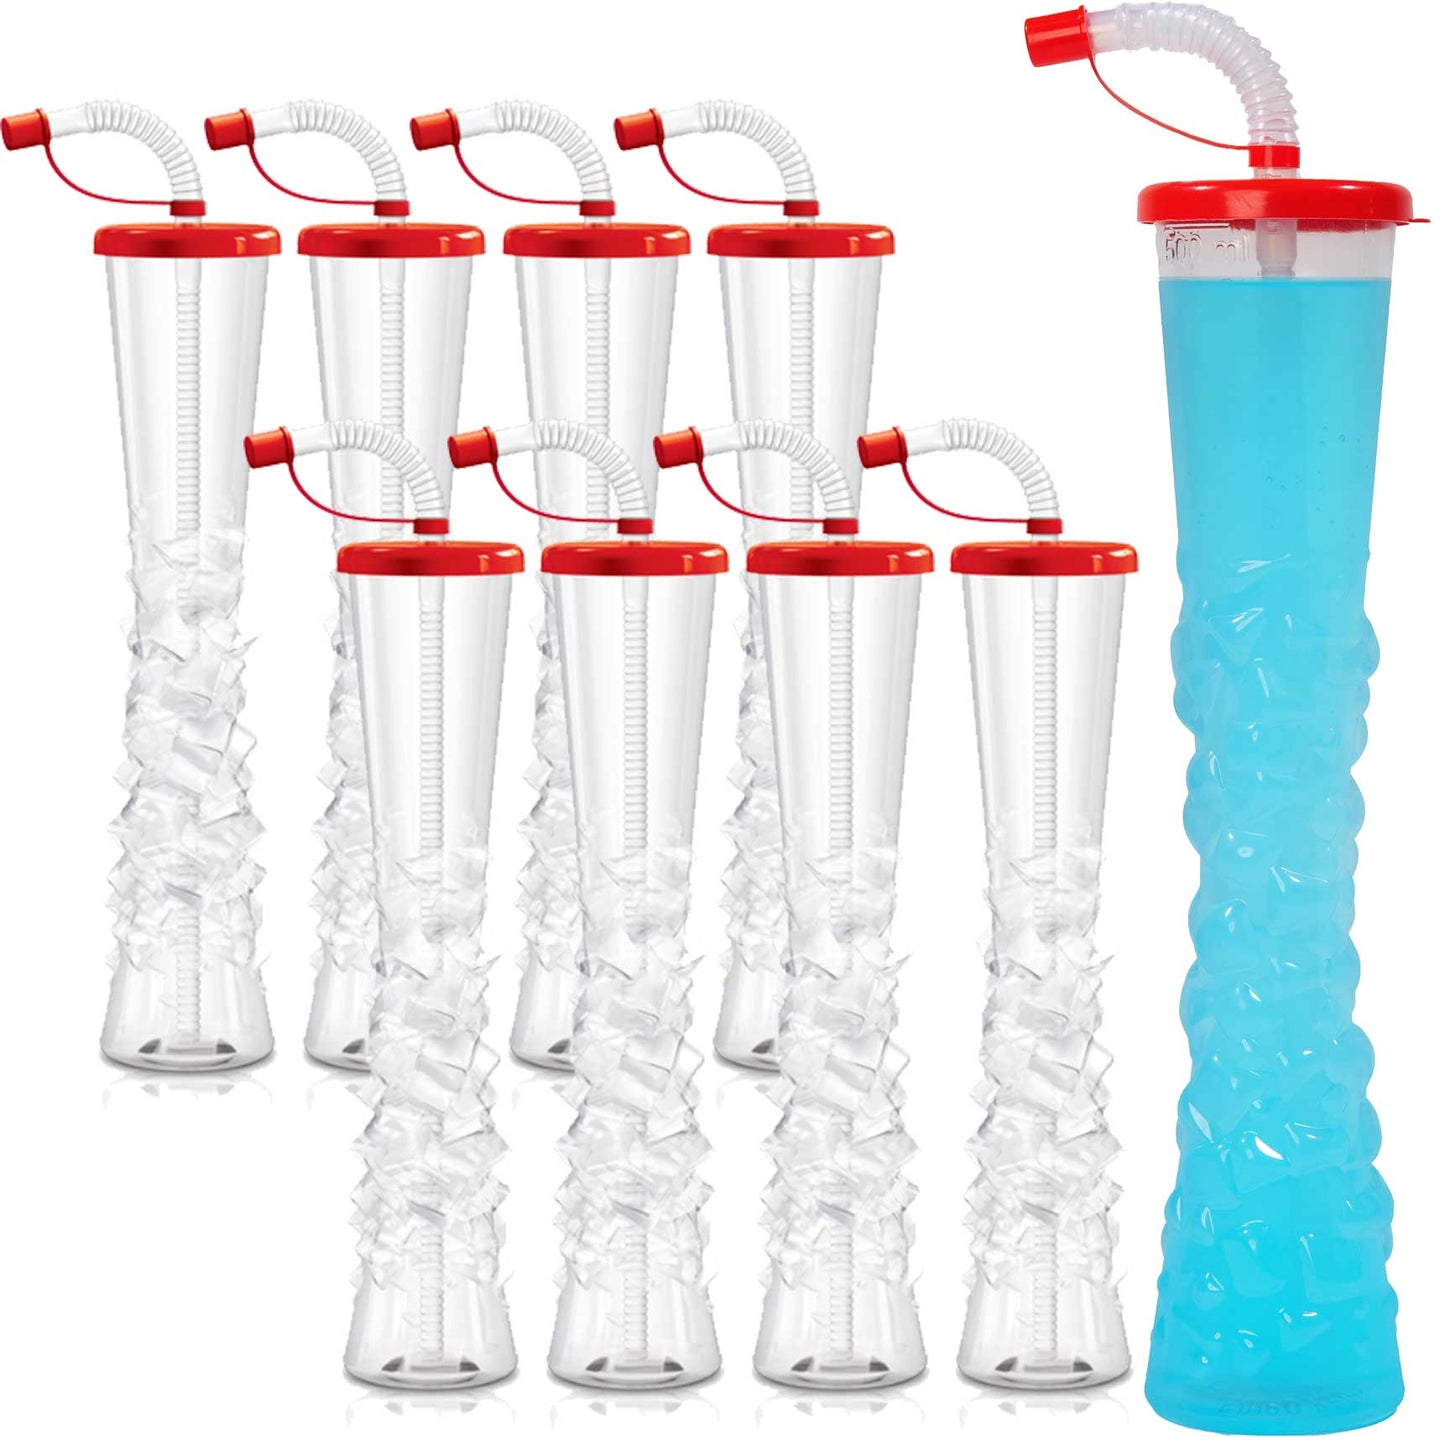 https://noveltycupsusa.com/cdn/shop/files/sweet-world-usa-yard-cups-ice-yard-cups-54-cups-red-for-margaritas-and-frozen-drinks-kids-parties-17oz-500ml-sw-57351-cups-with-lids-and-straws-35524169269407.jpg?v=1684776576&width=1445